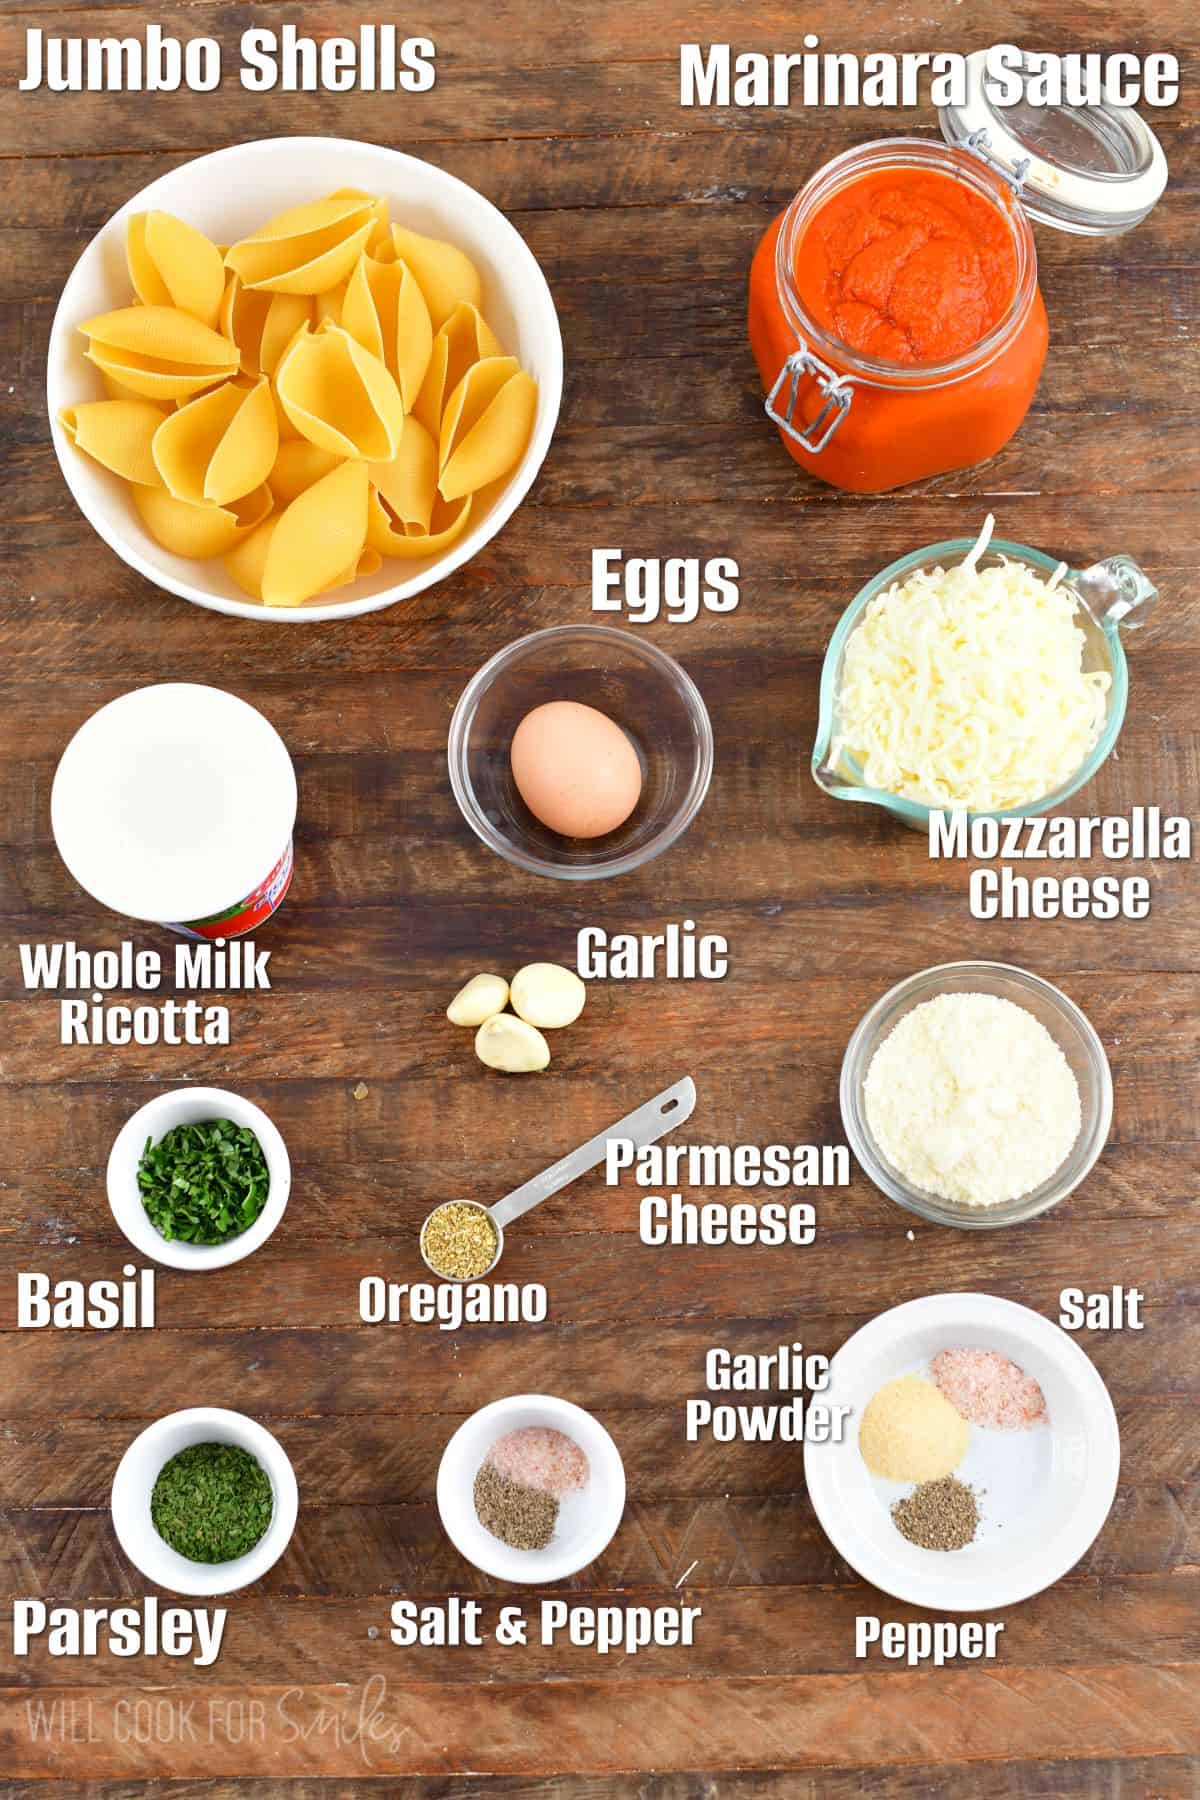 labeled ingredients to make stuffed shells on the wooden background.